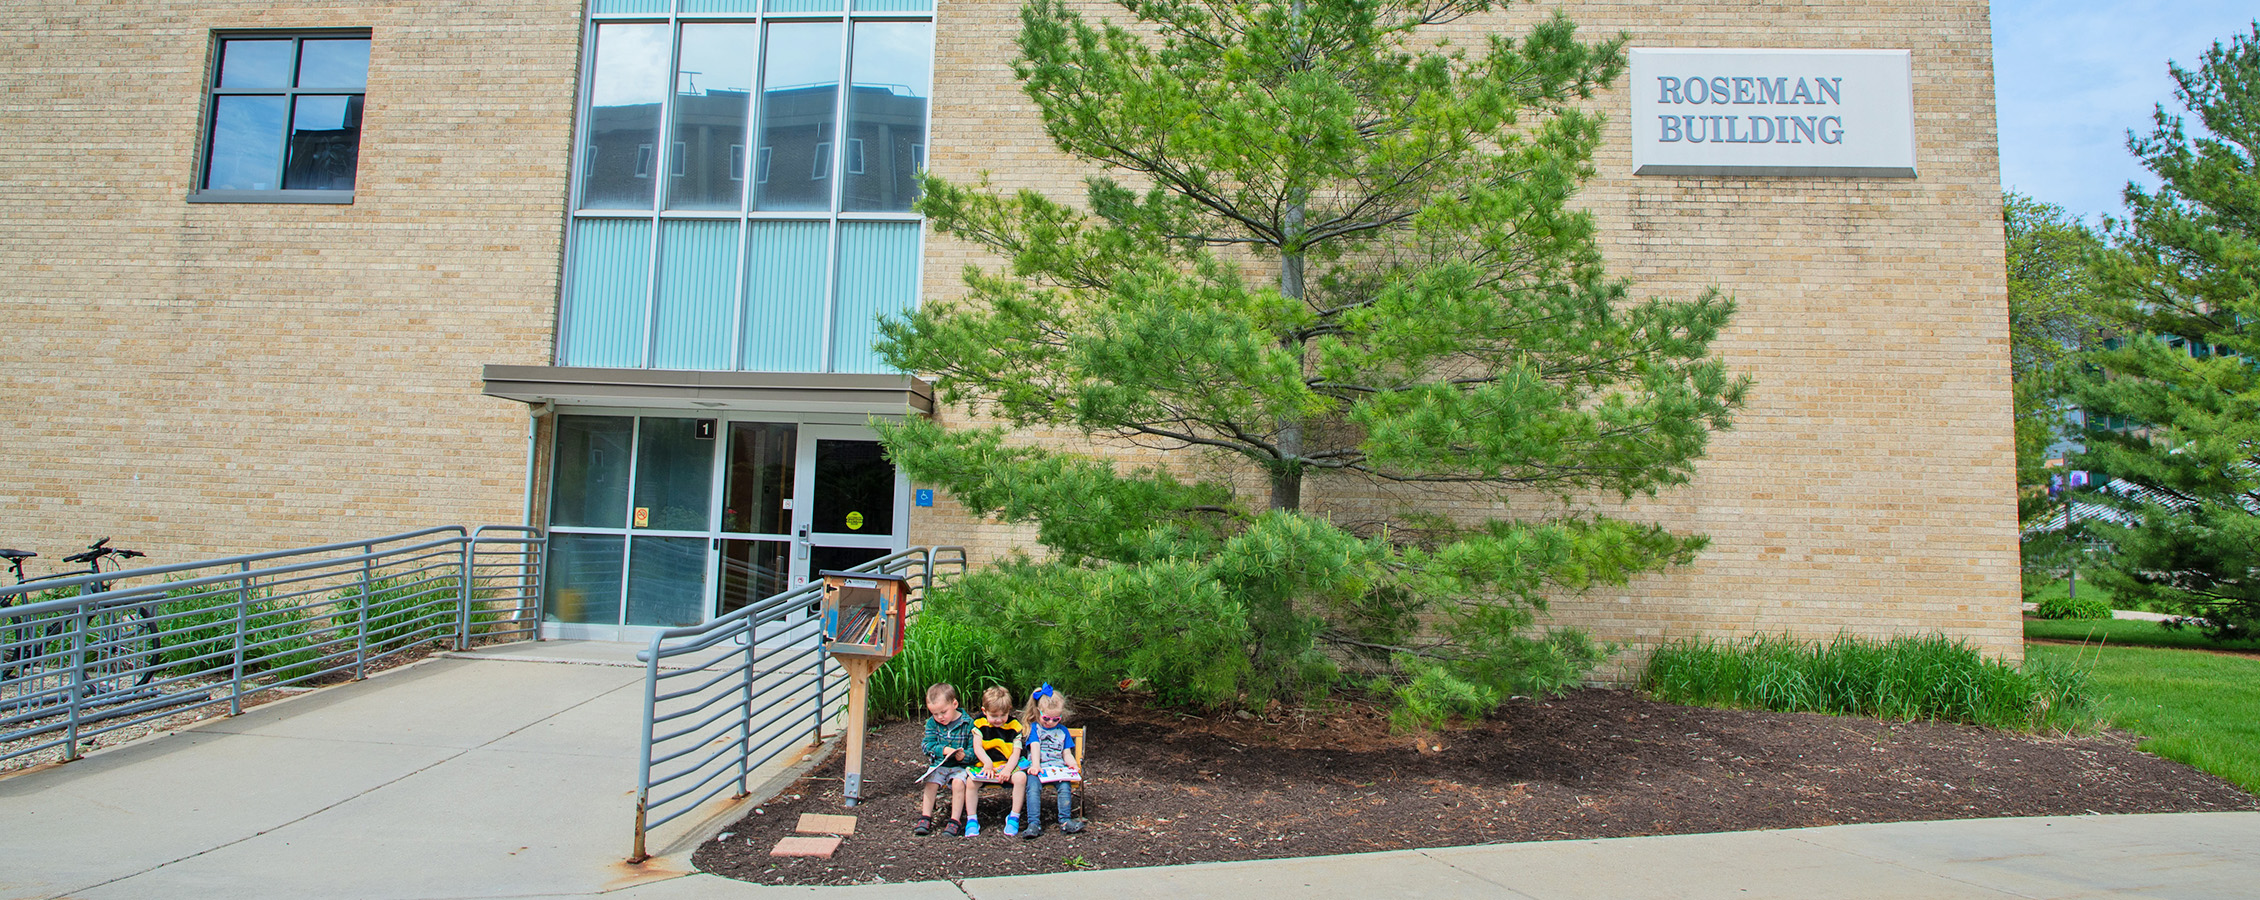 Image outside of Roseman hall with a green tree in front of it and three children sitting in front of the tree.